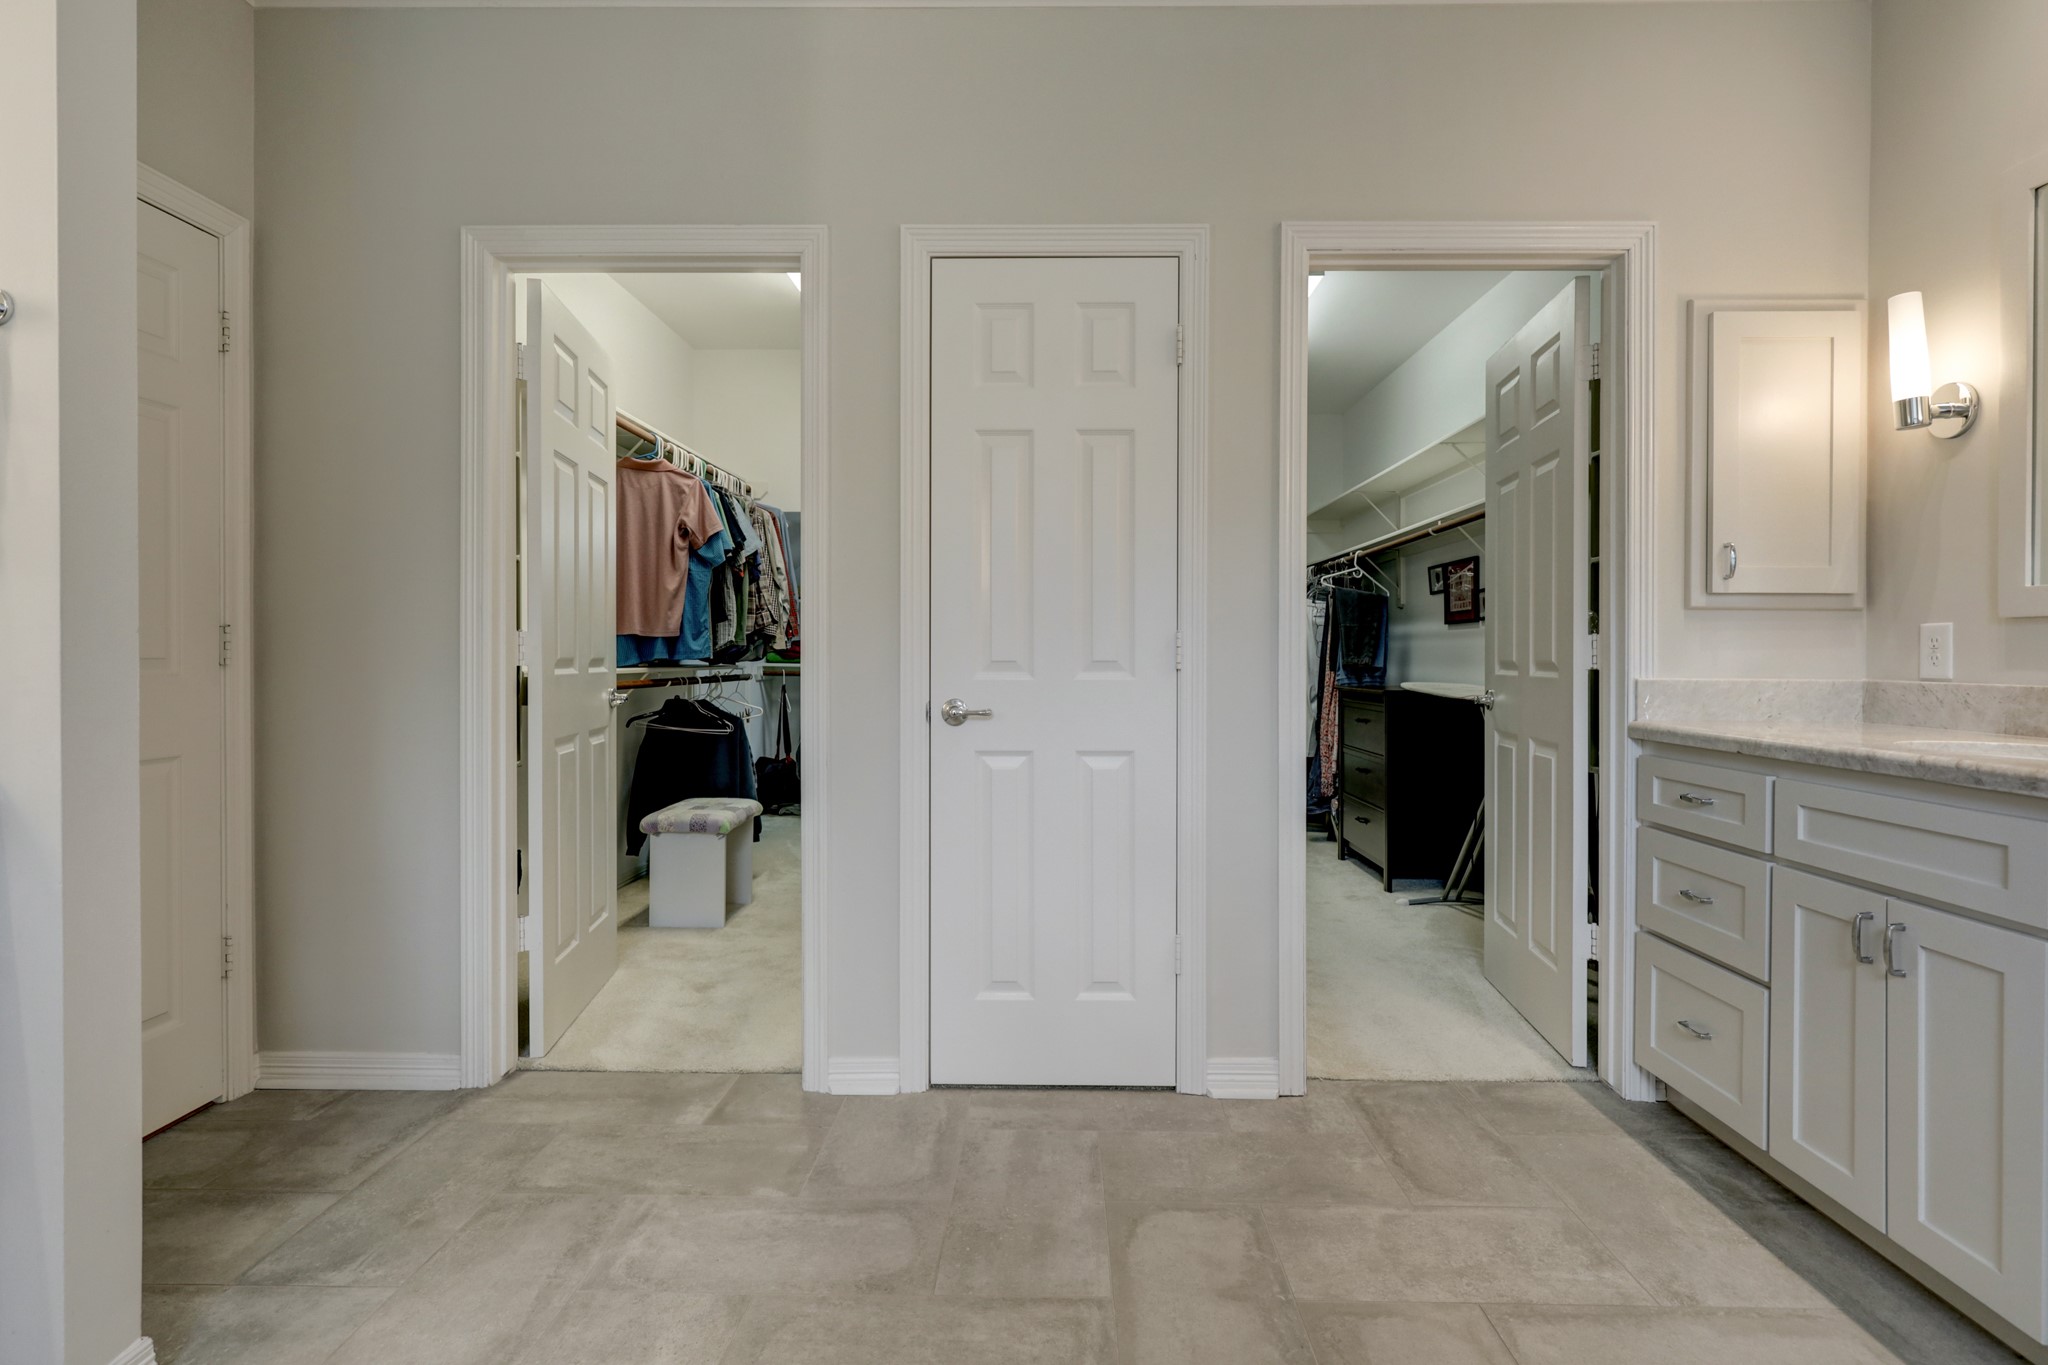 This angle reveals the dual oversized walk-in closets.